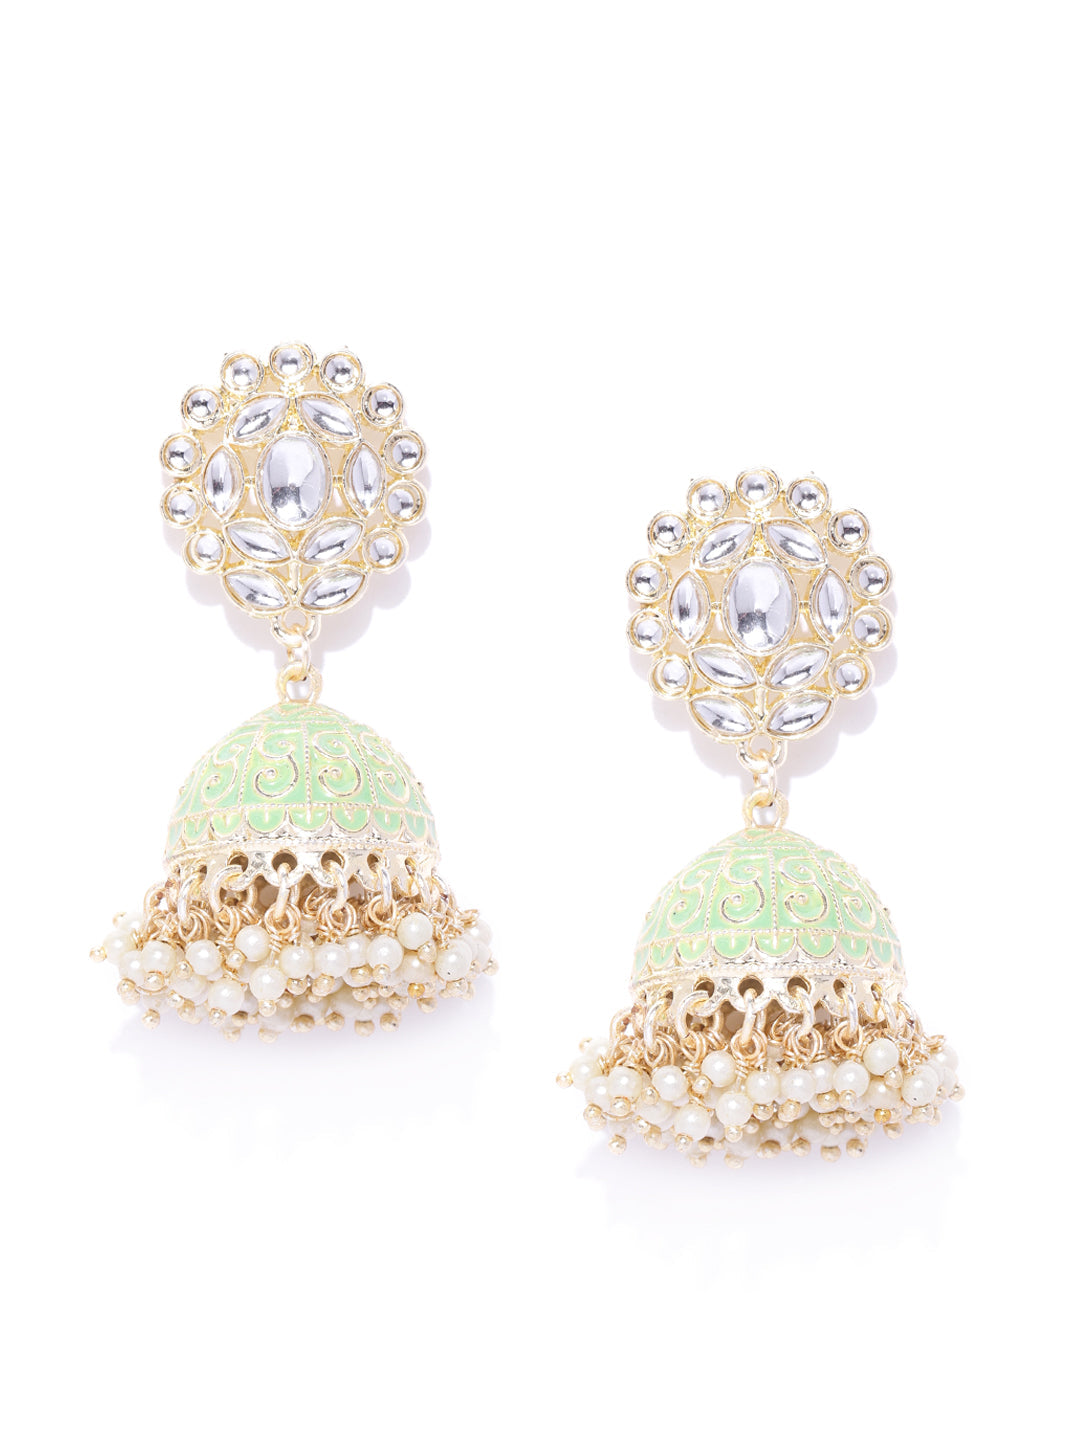 Gold-Plated Kundan Studded Floral Patterned Meenakari Jhumka Earrings in Green Color - NOZ2TOZ